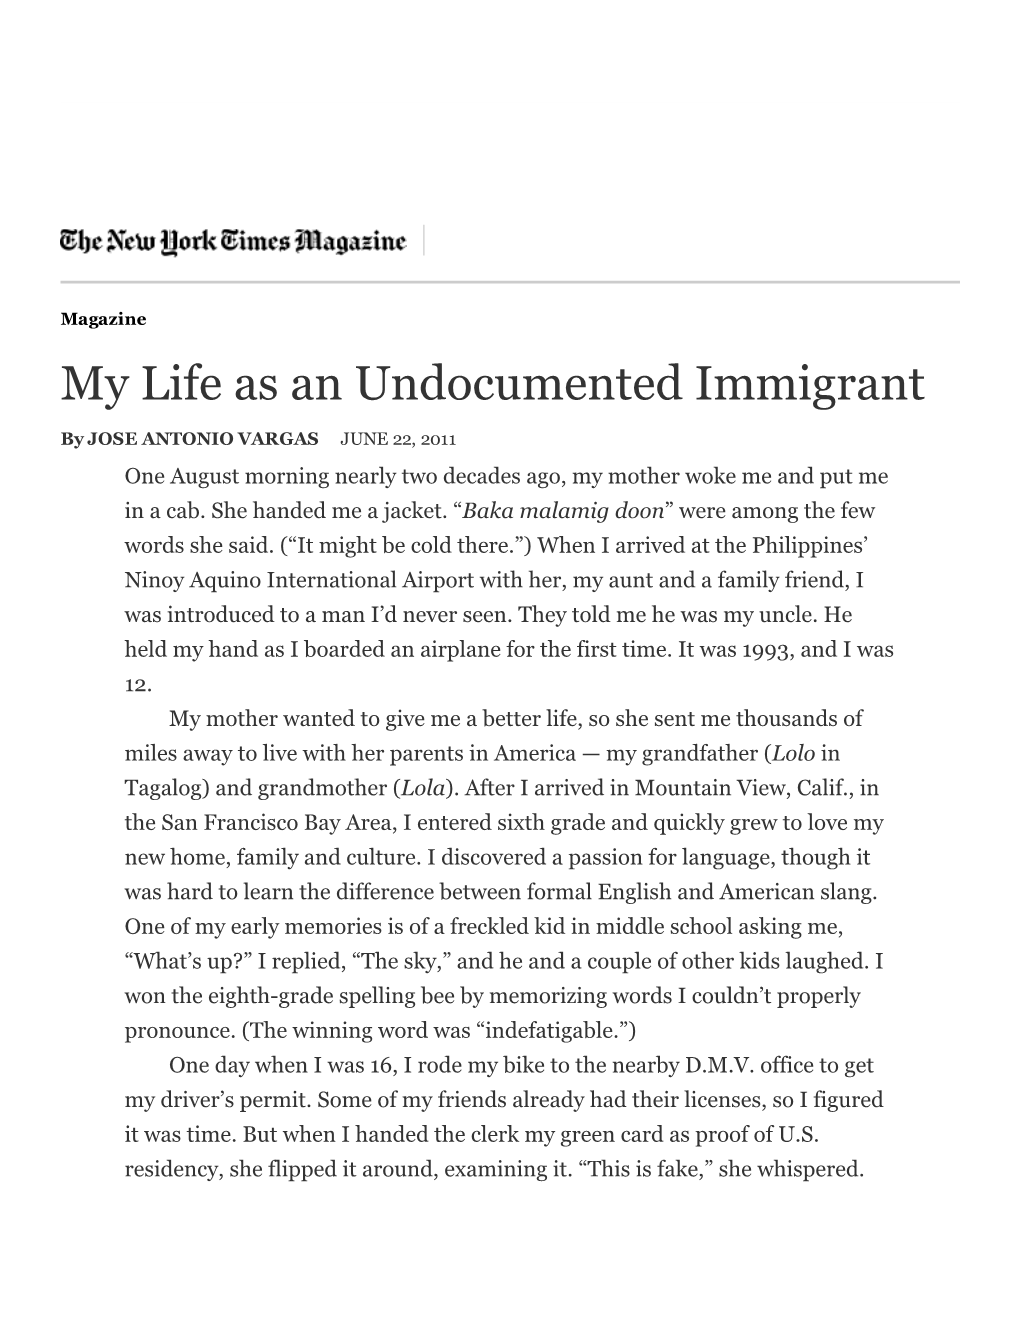 My Life As an Undocumented Immigrant ­ Nytimes.Com